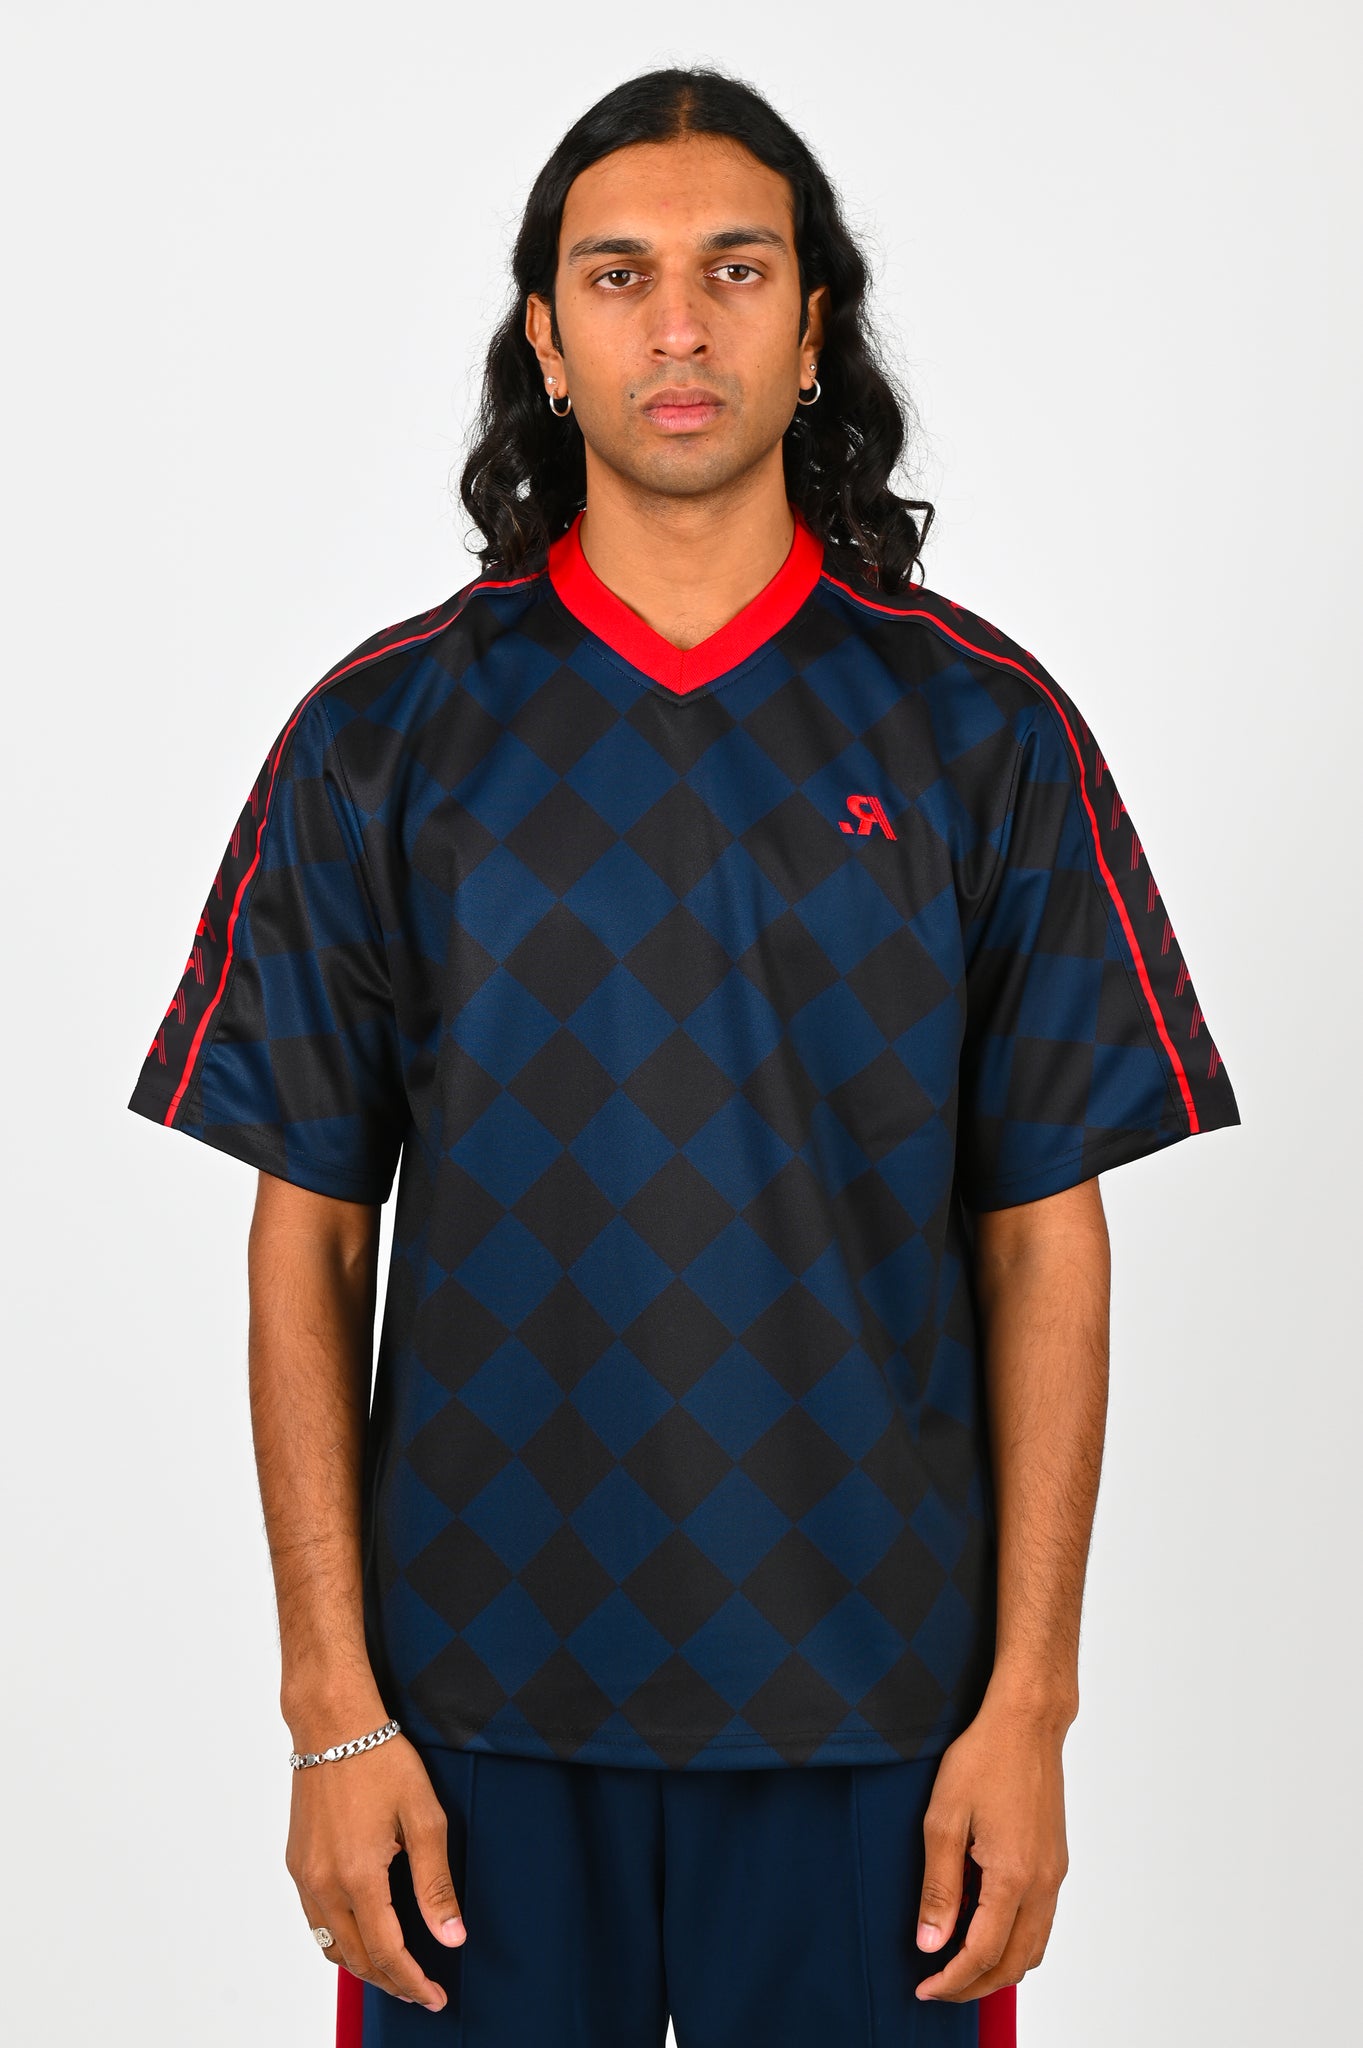 R.Sport 'Half Time' Training Top In Black Check